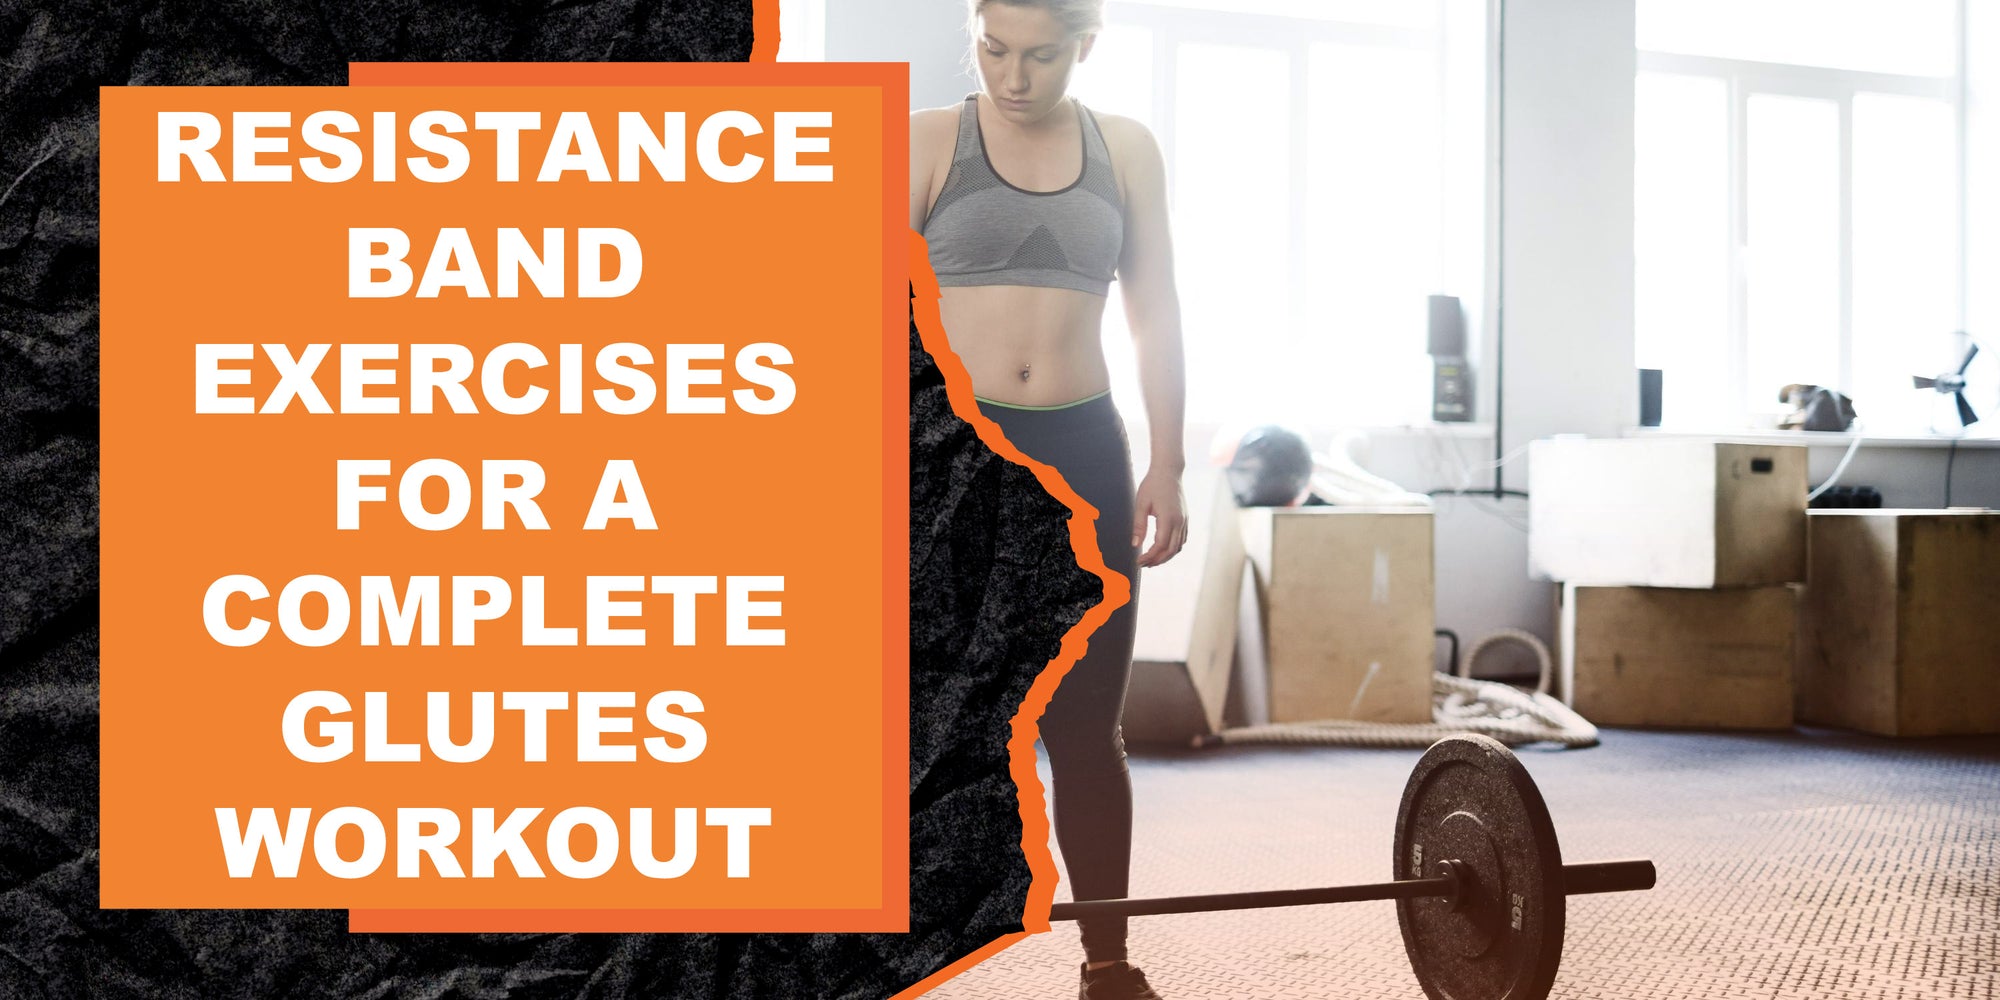 Resistance Band Exercises for a Complete Glutes Workout